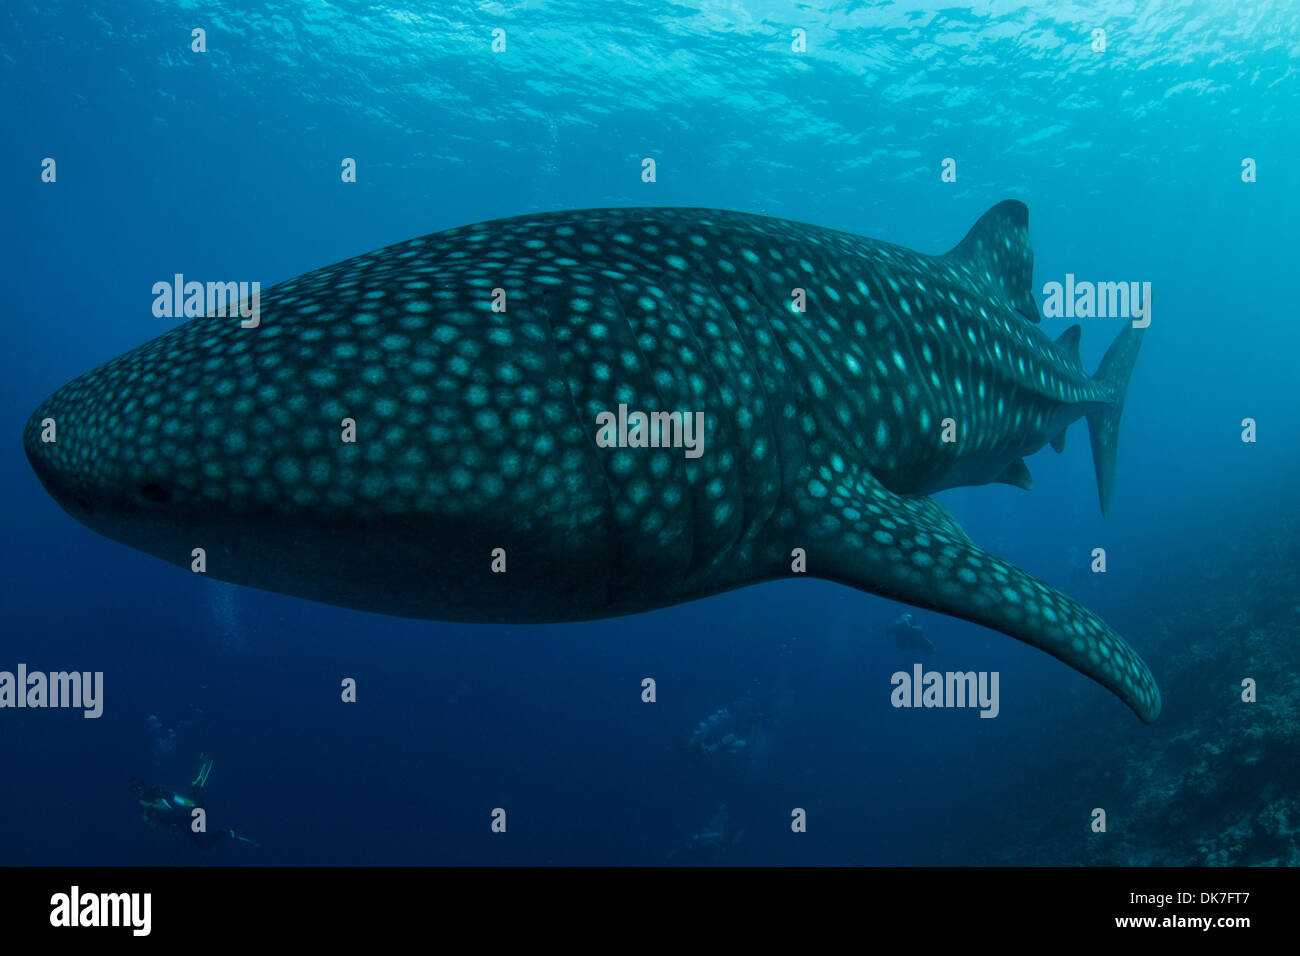 Diving close up with whale shark Stock Photo